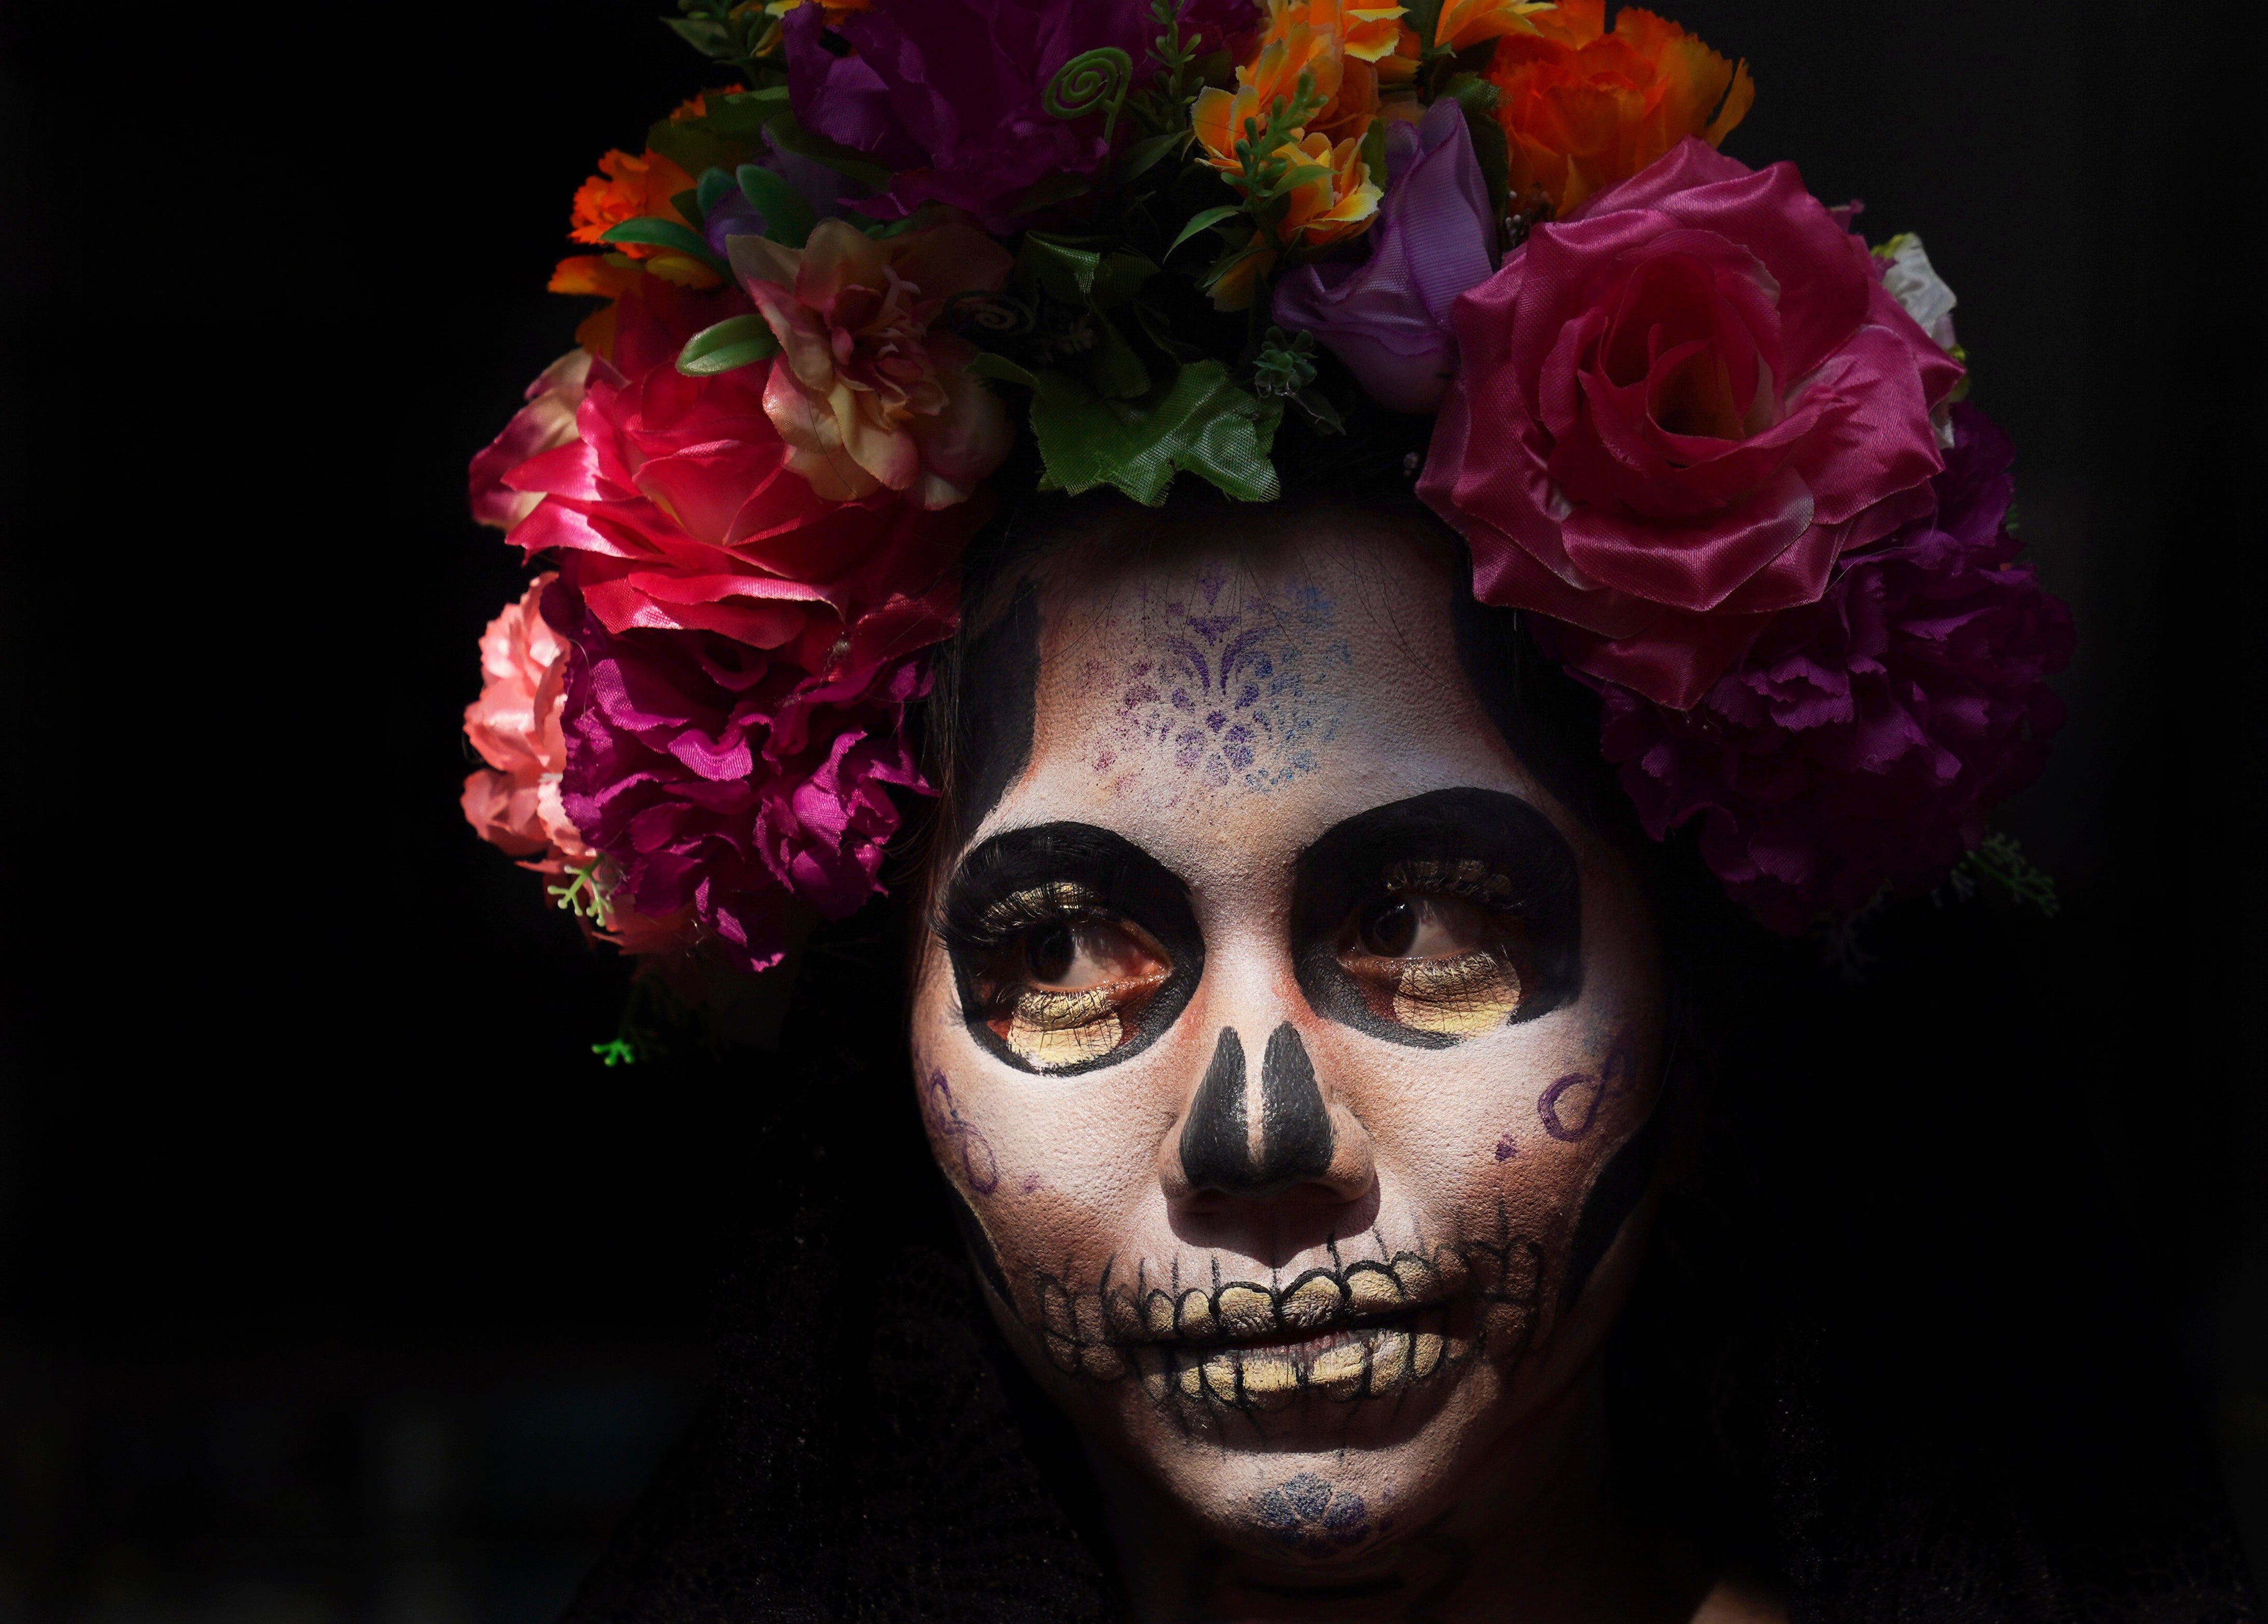 A woman dressed as La Catrina for Day of the Dead